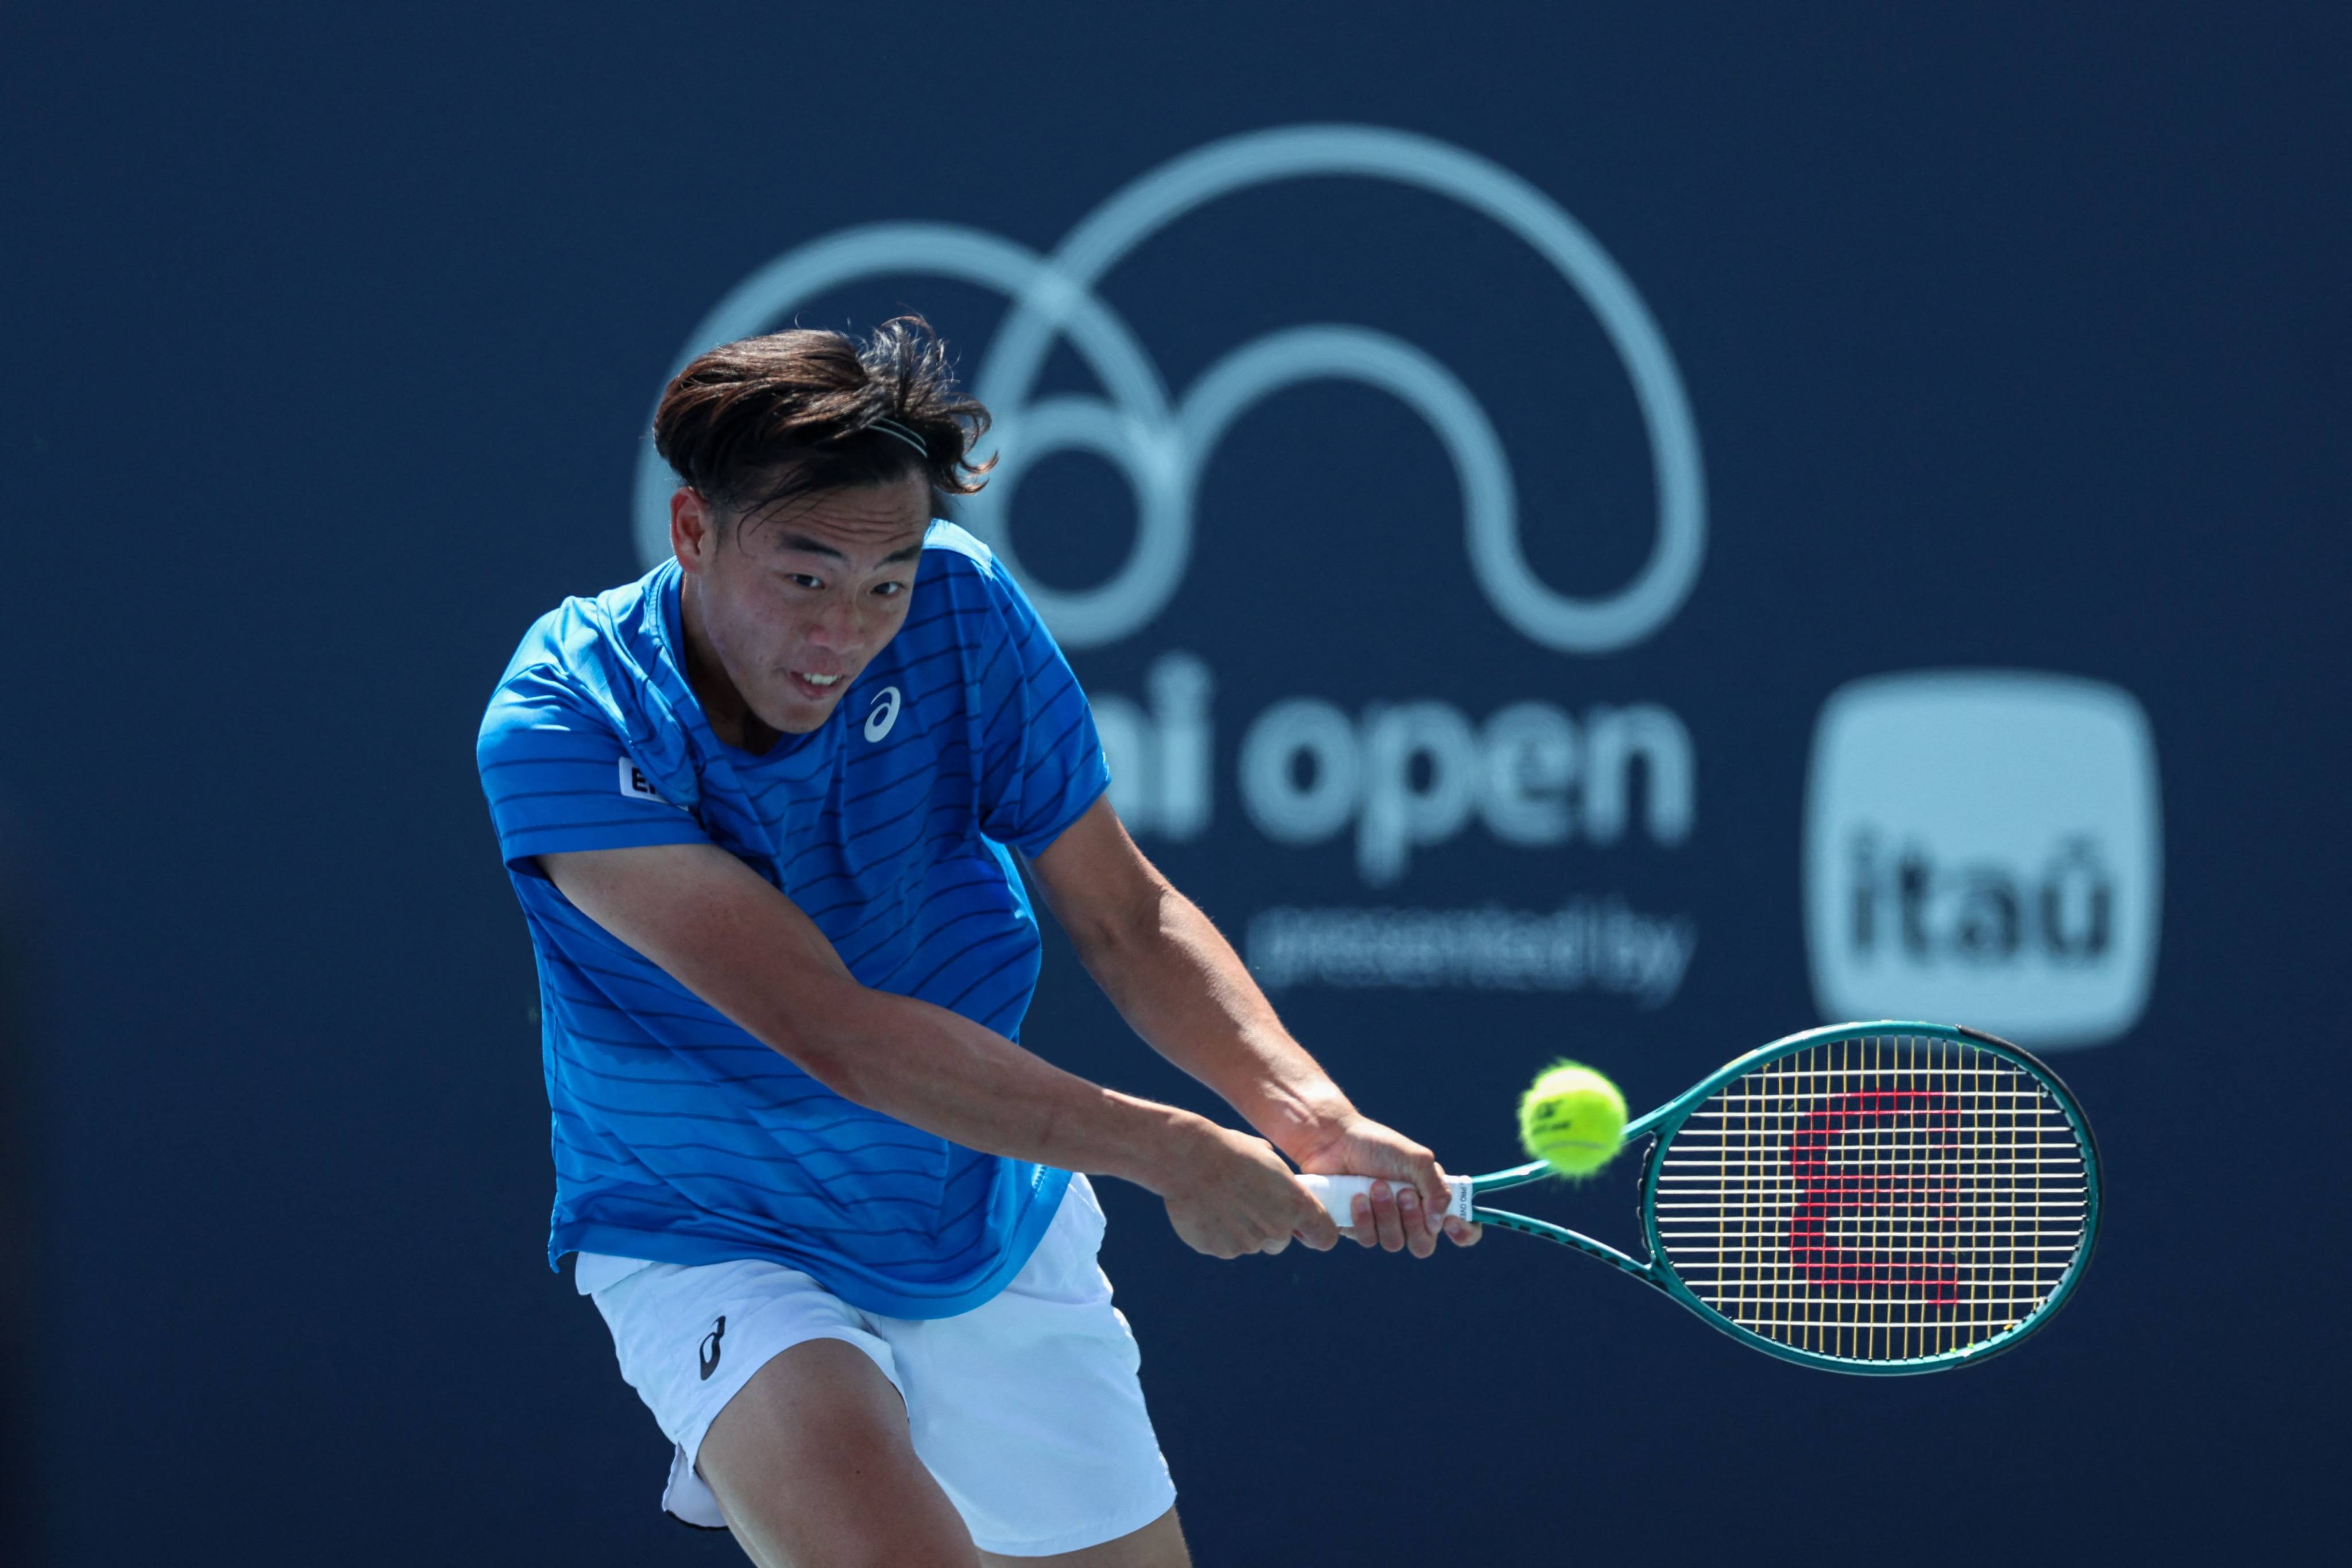 Coleman Wong broke into the world’s top 200 after making the main draw at the Miami Open. Photo: Getty Images